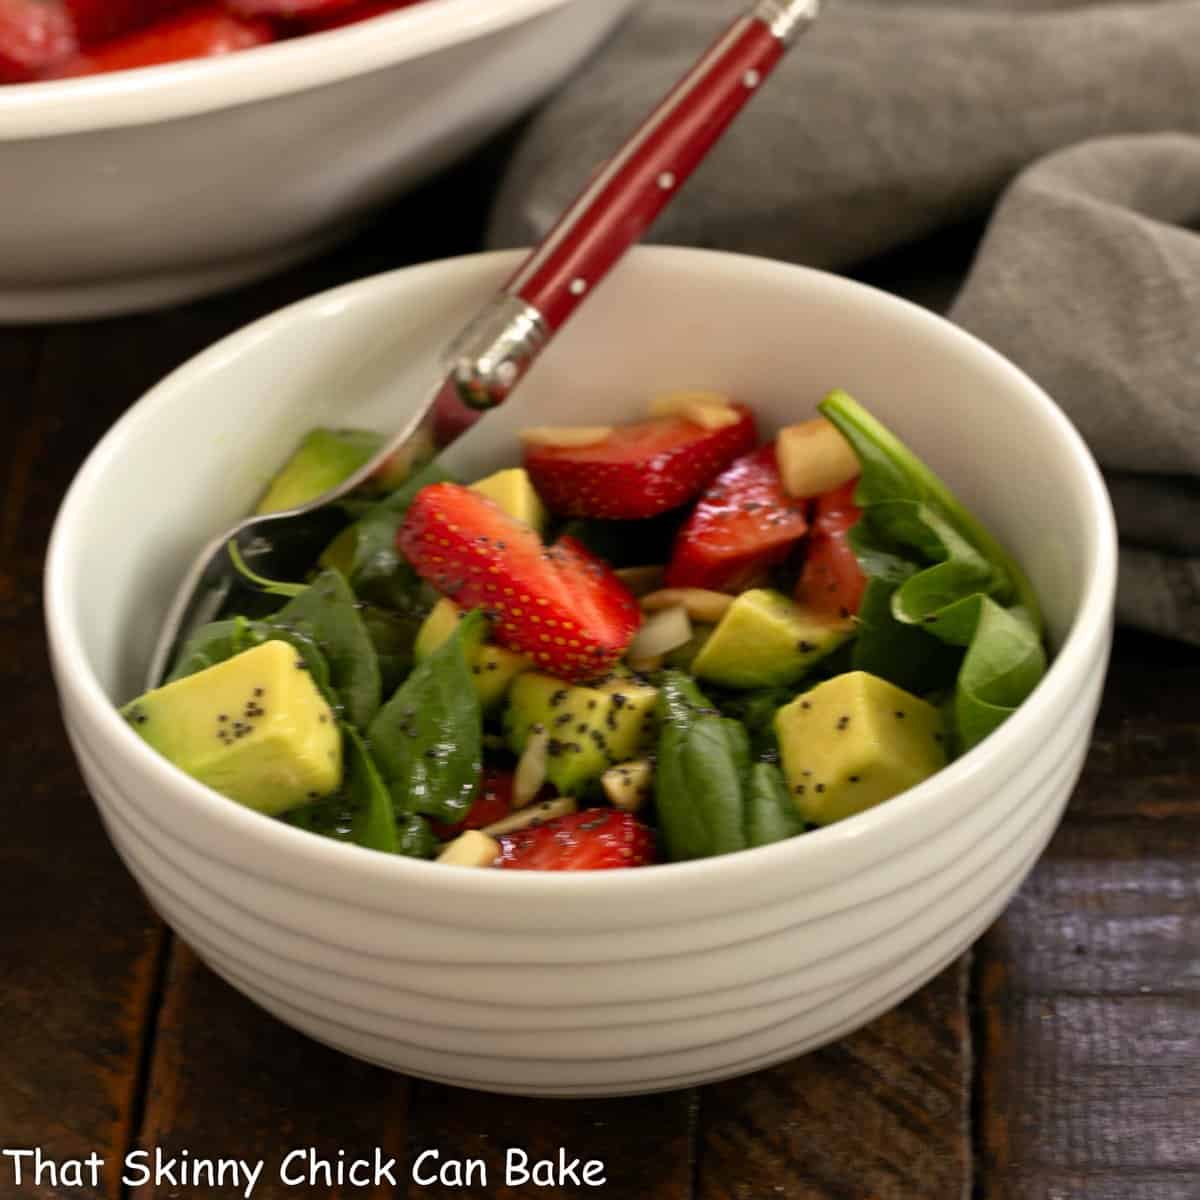 Strawberry Spinach Salad with Avocados